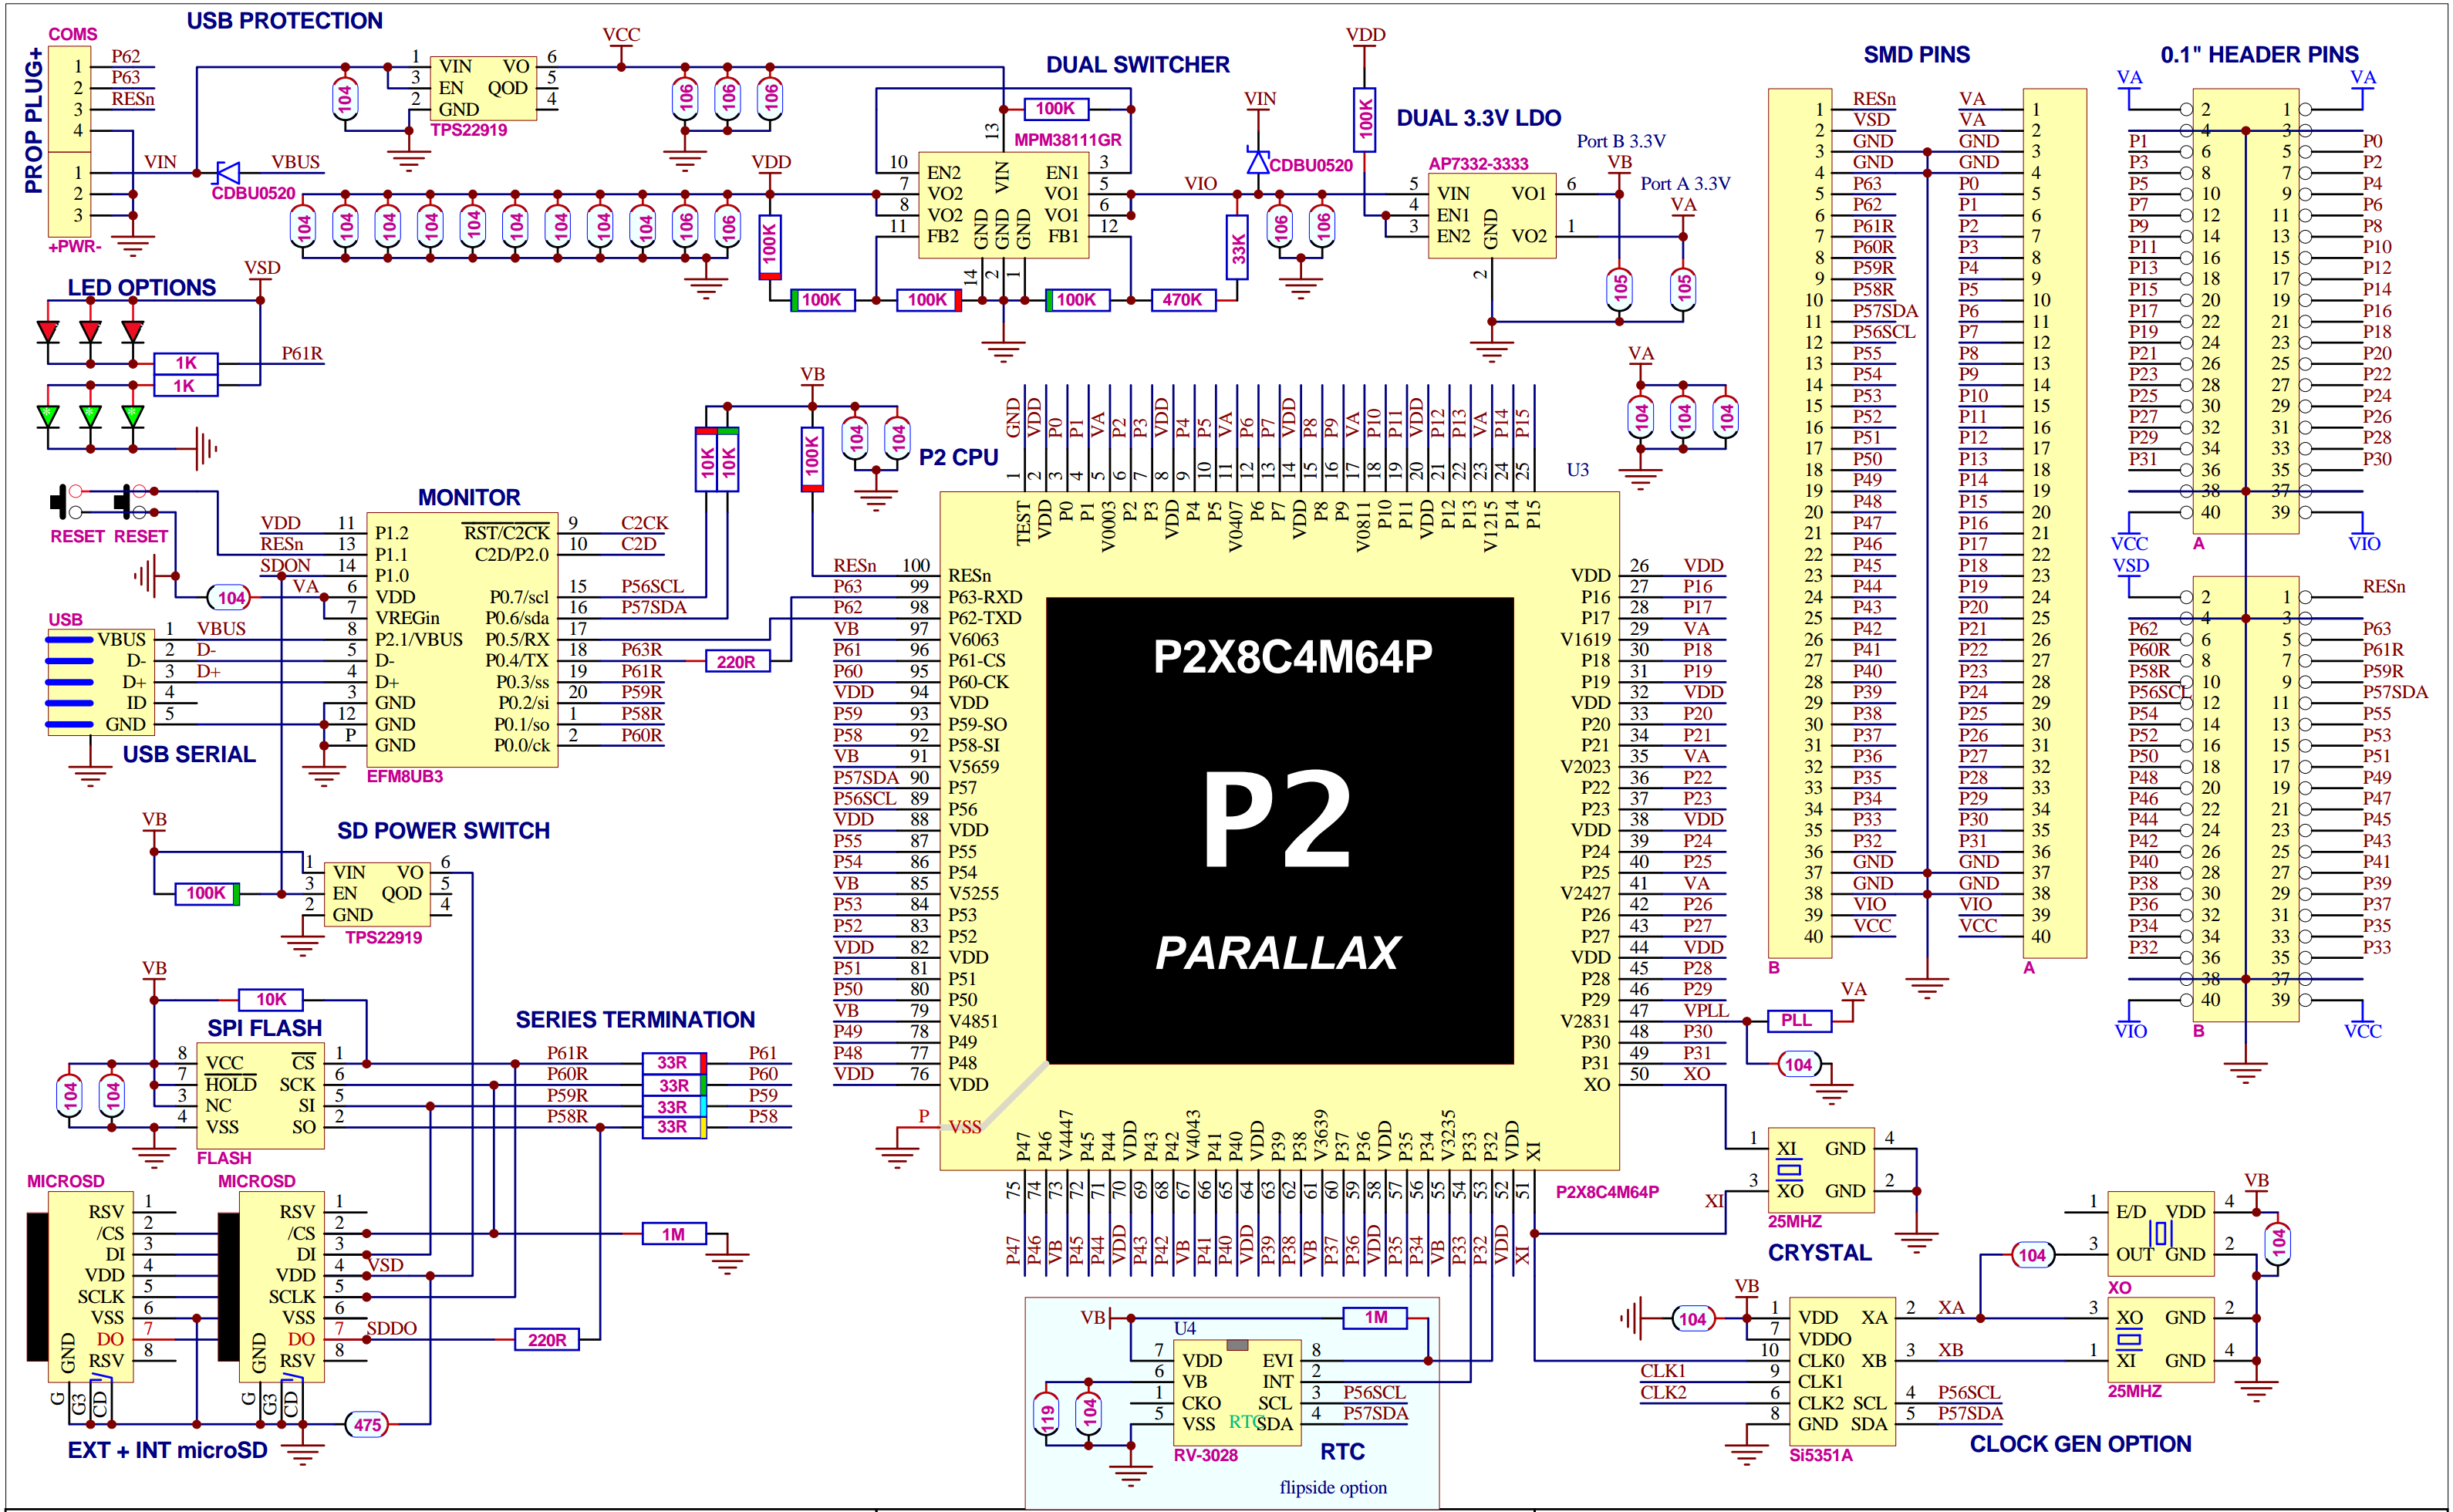 P2D2R2%20SCHEMATIC%20190505.png